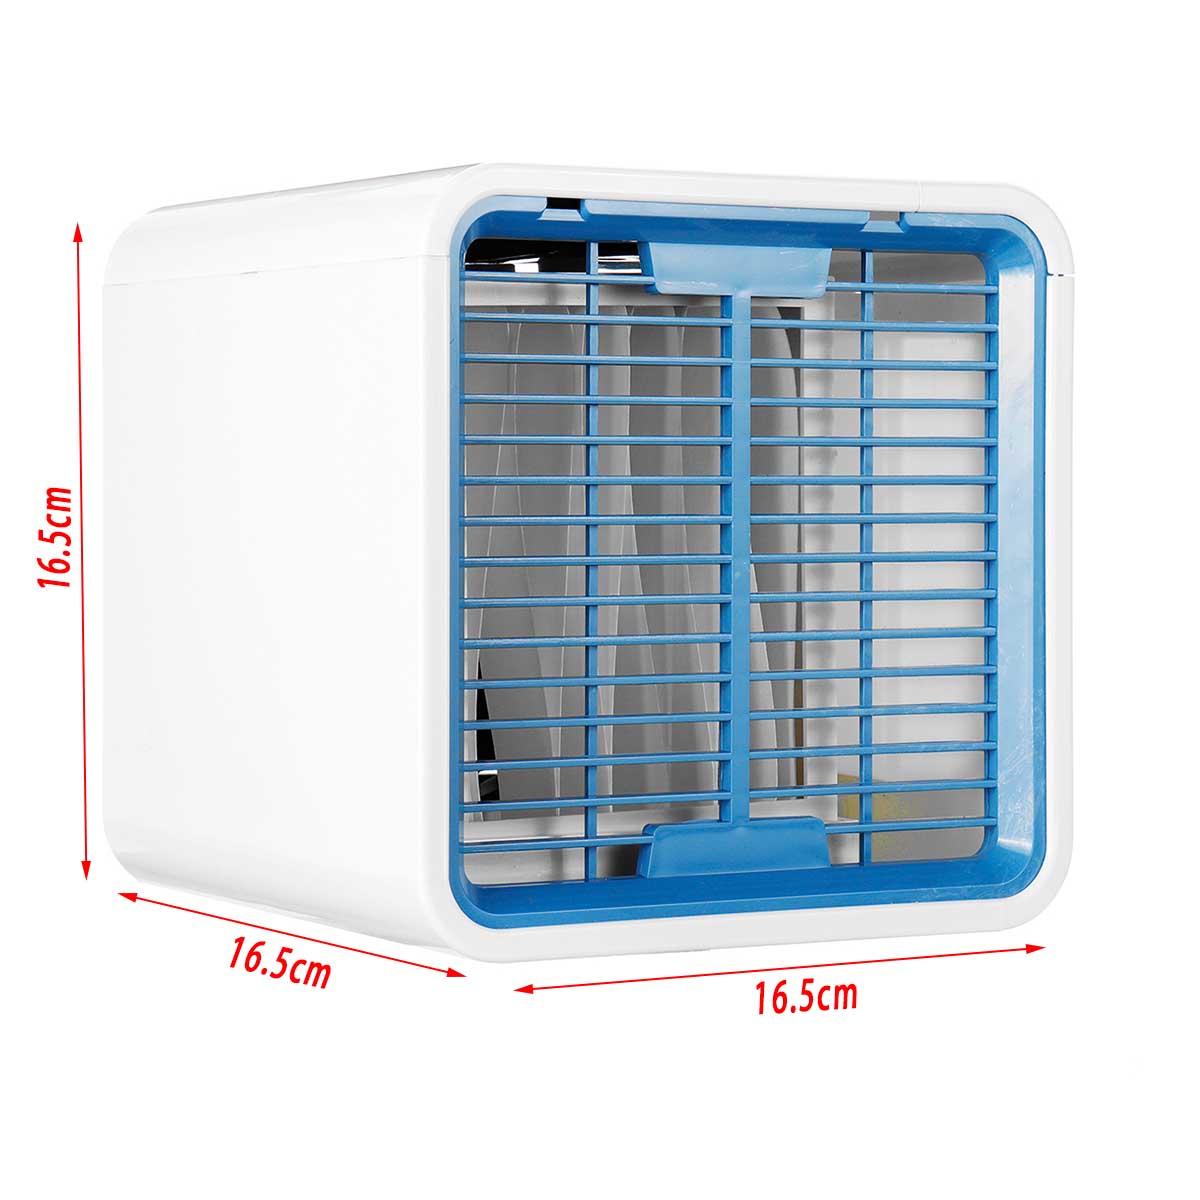 Display-Personal-Air-Cooler-USB-Portable-3-In-1-Refrigeration-Humidification-Purification-LED-Table--1516587-8